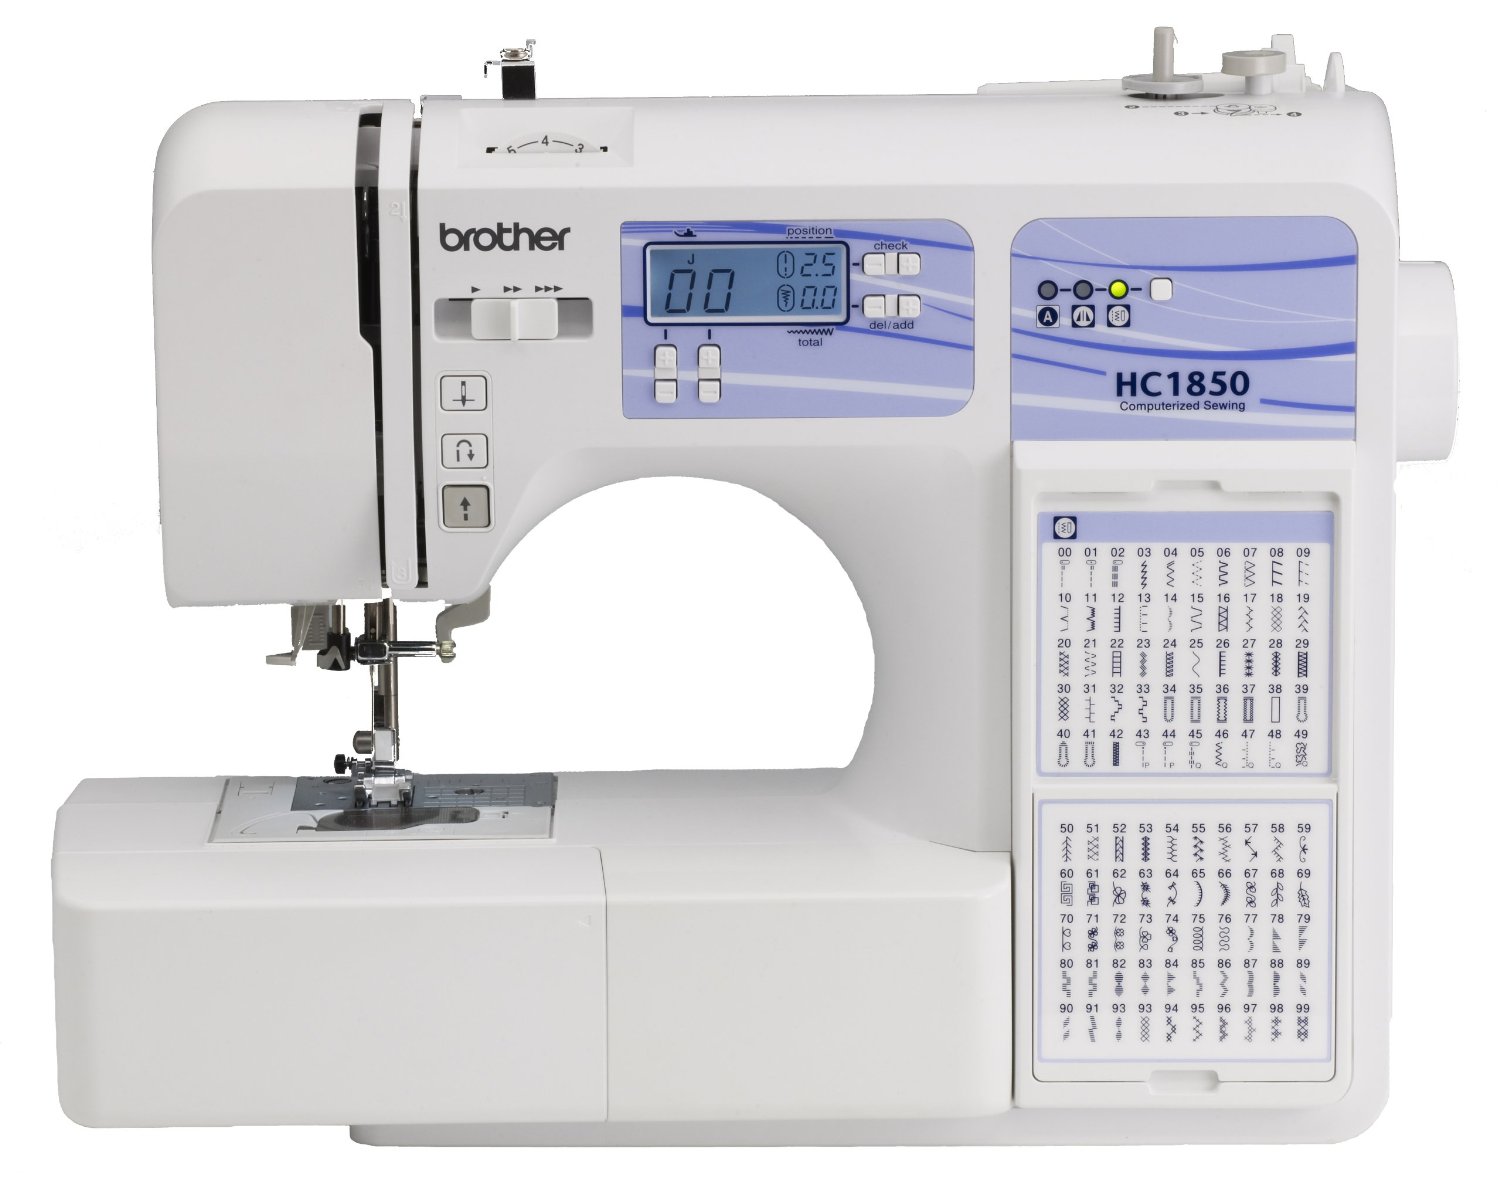 Save on the Brother HC1850 Computerized Sewing and Quilting Machine with 130 Built-in Stitches – Just $142.50!